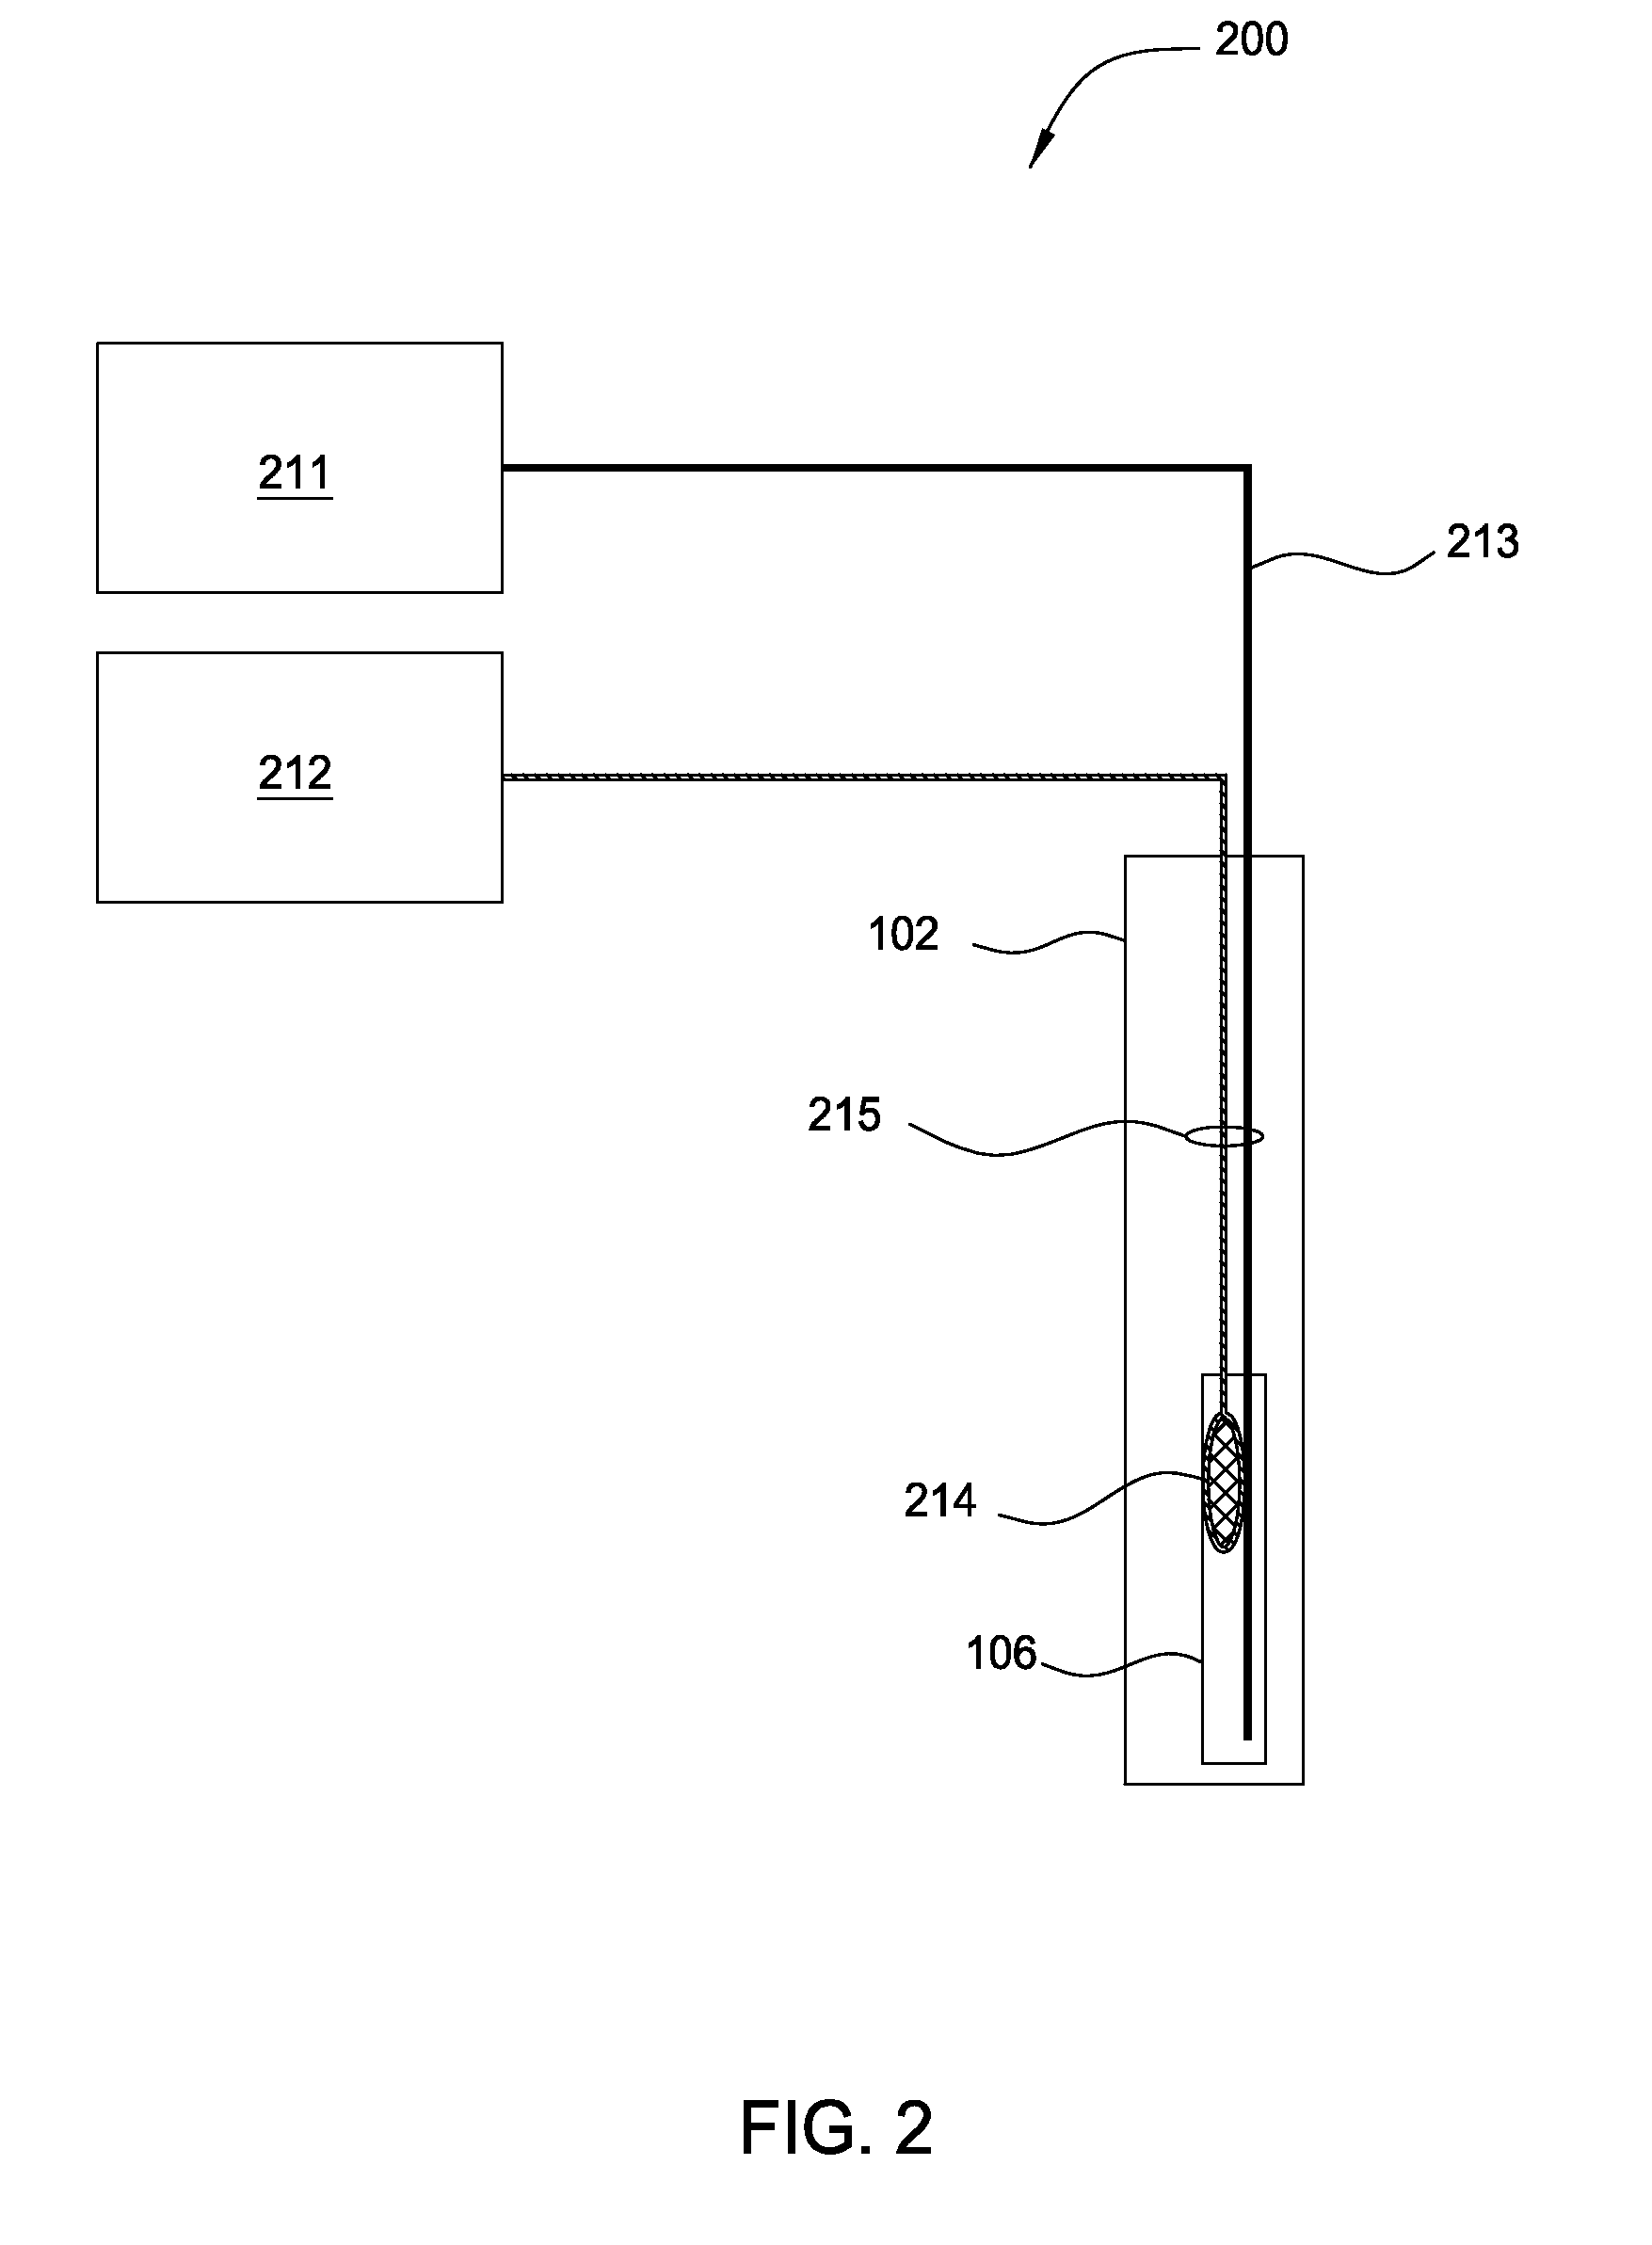 Sonic/acoustic monitoring using optical distributed acoustic sensing